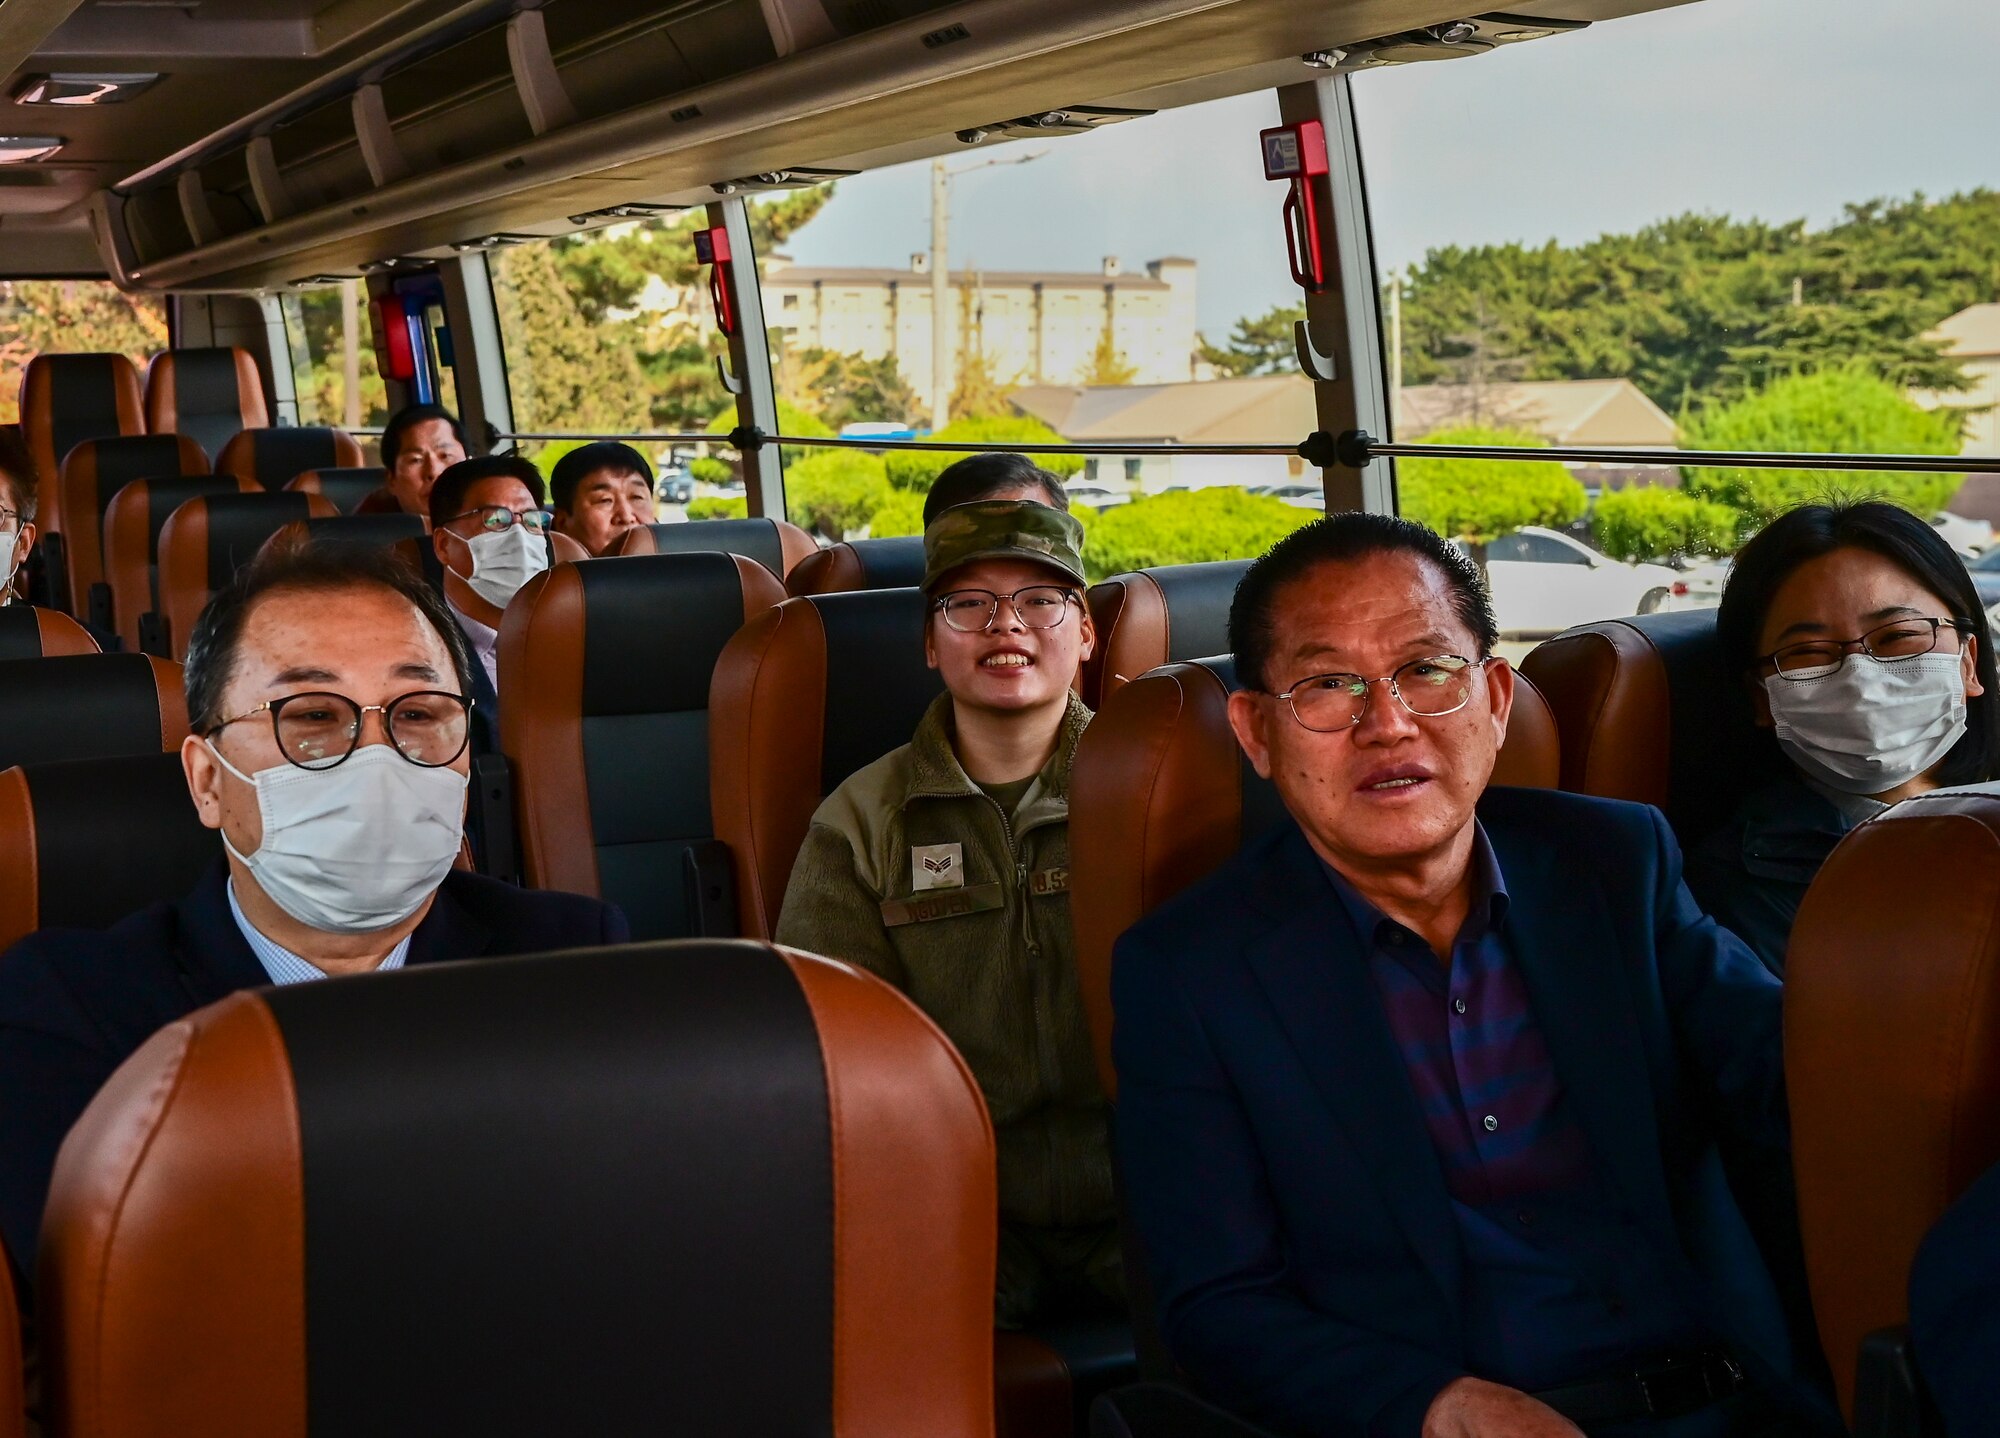 An Airman sits on a bus amongst various clergy members from across the Republic of Korea